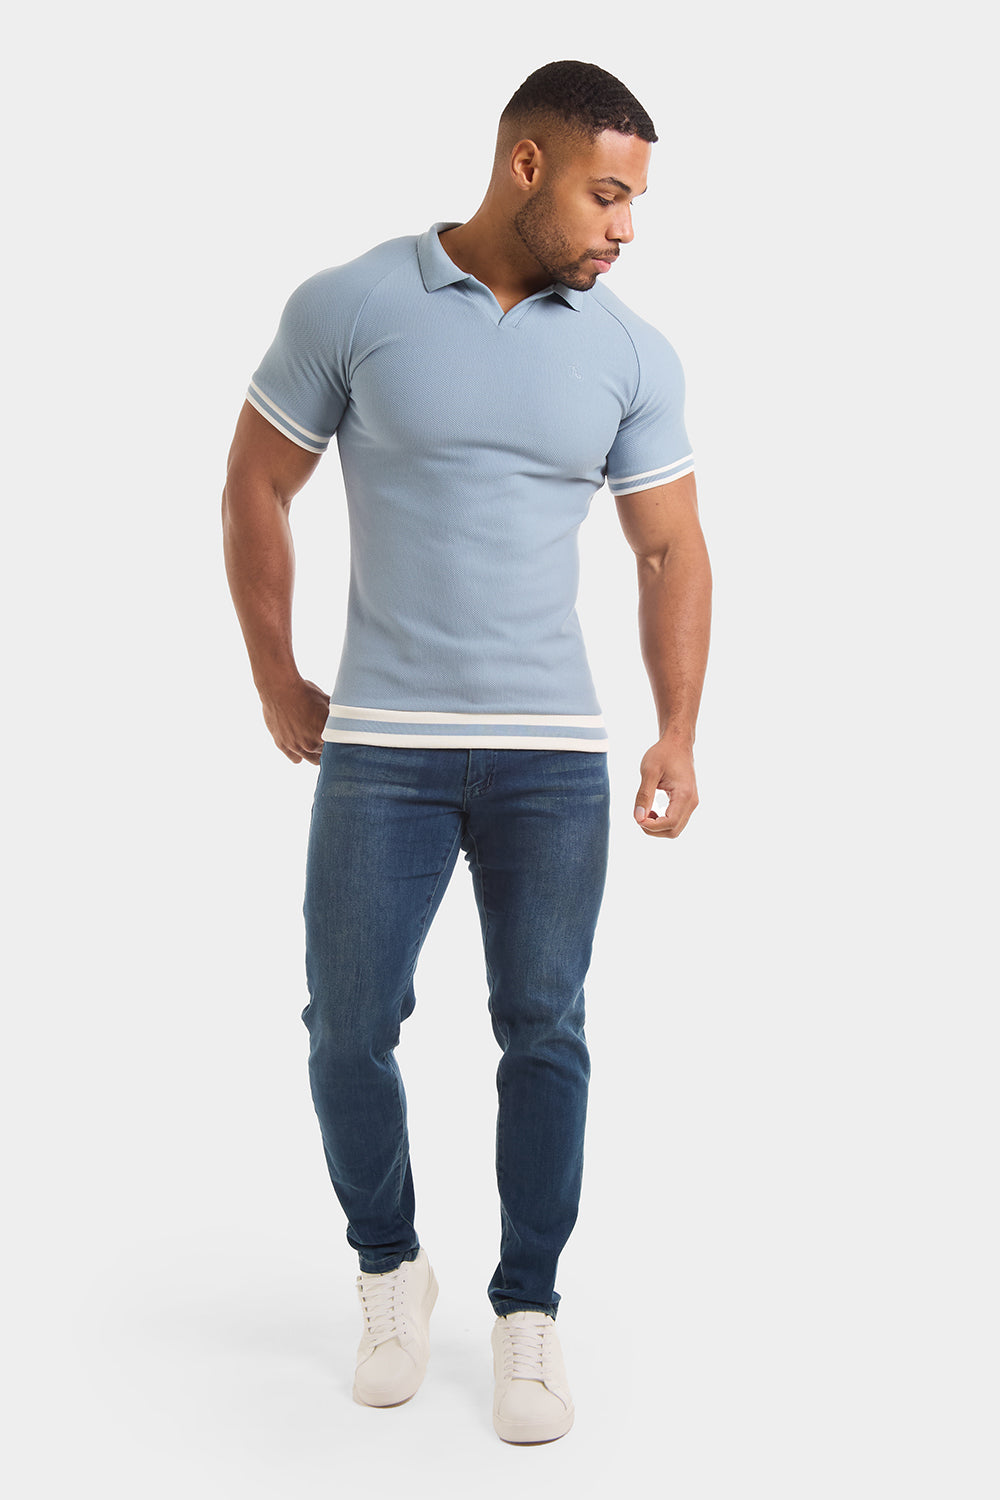 Muscle Fit Short Sleeve Retro Open Collar Polo in Blue/White - TAILORED ATHLETE - ROW